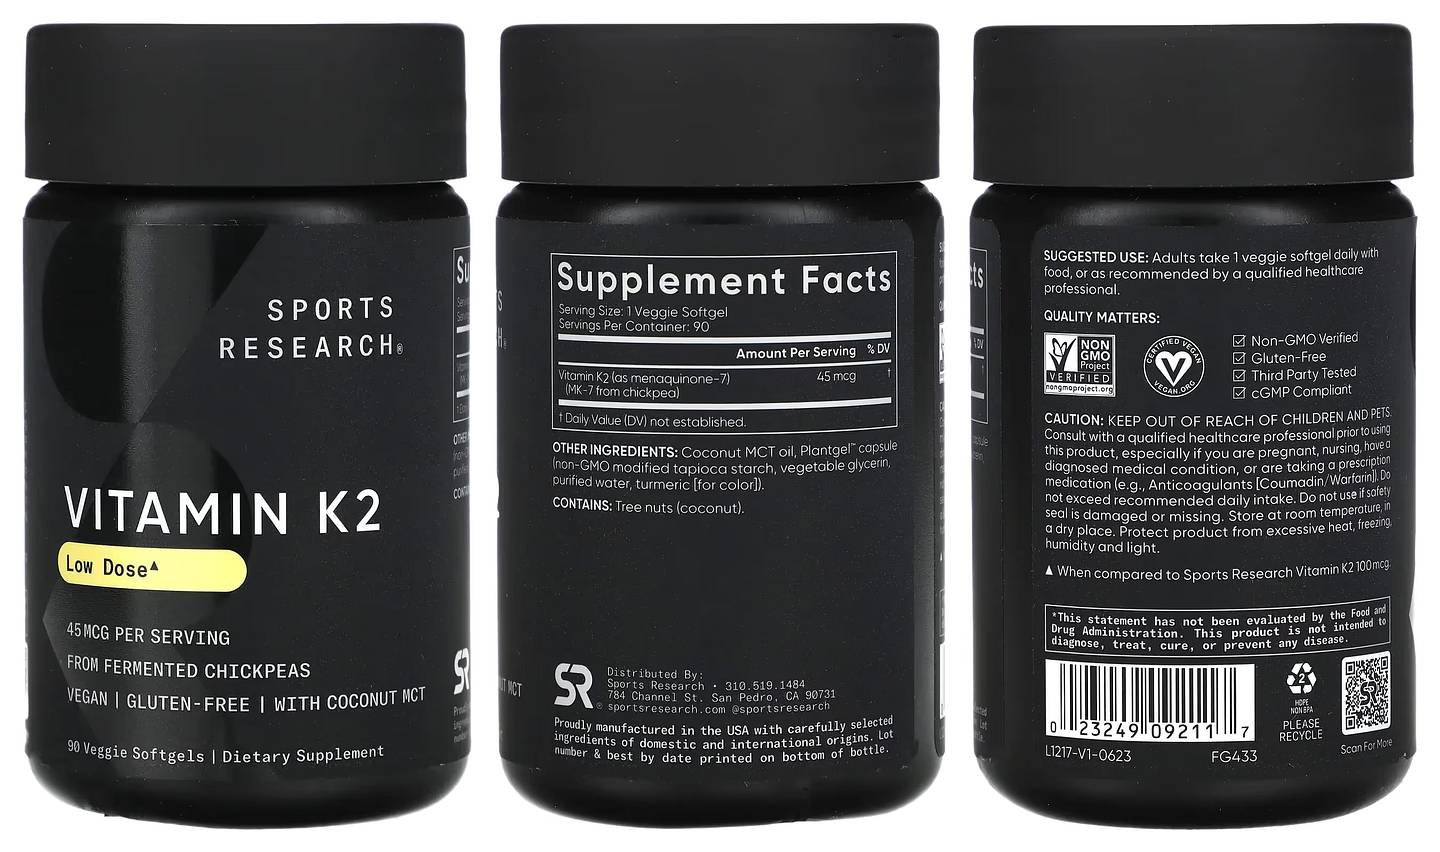 Sports Research, Vitamin K2 packaging